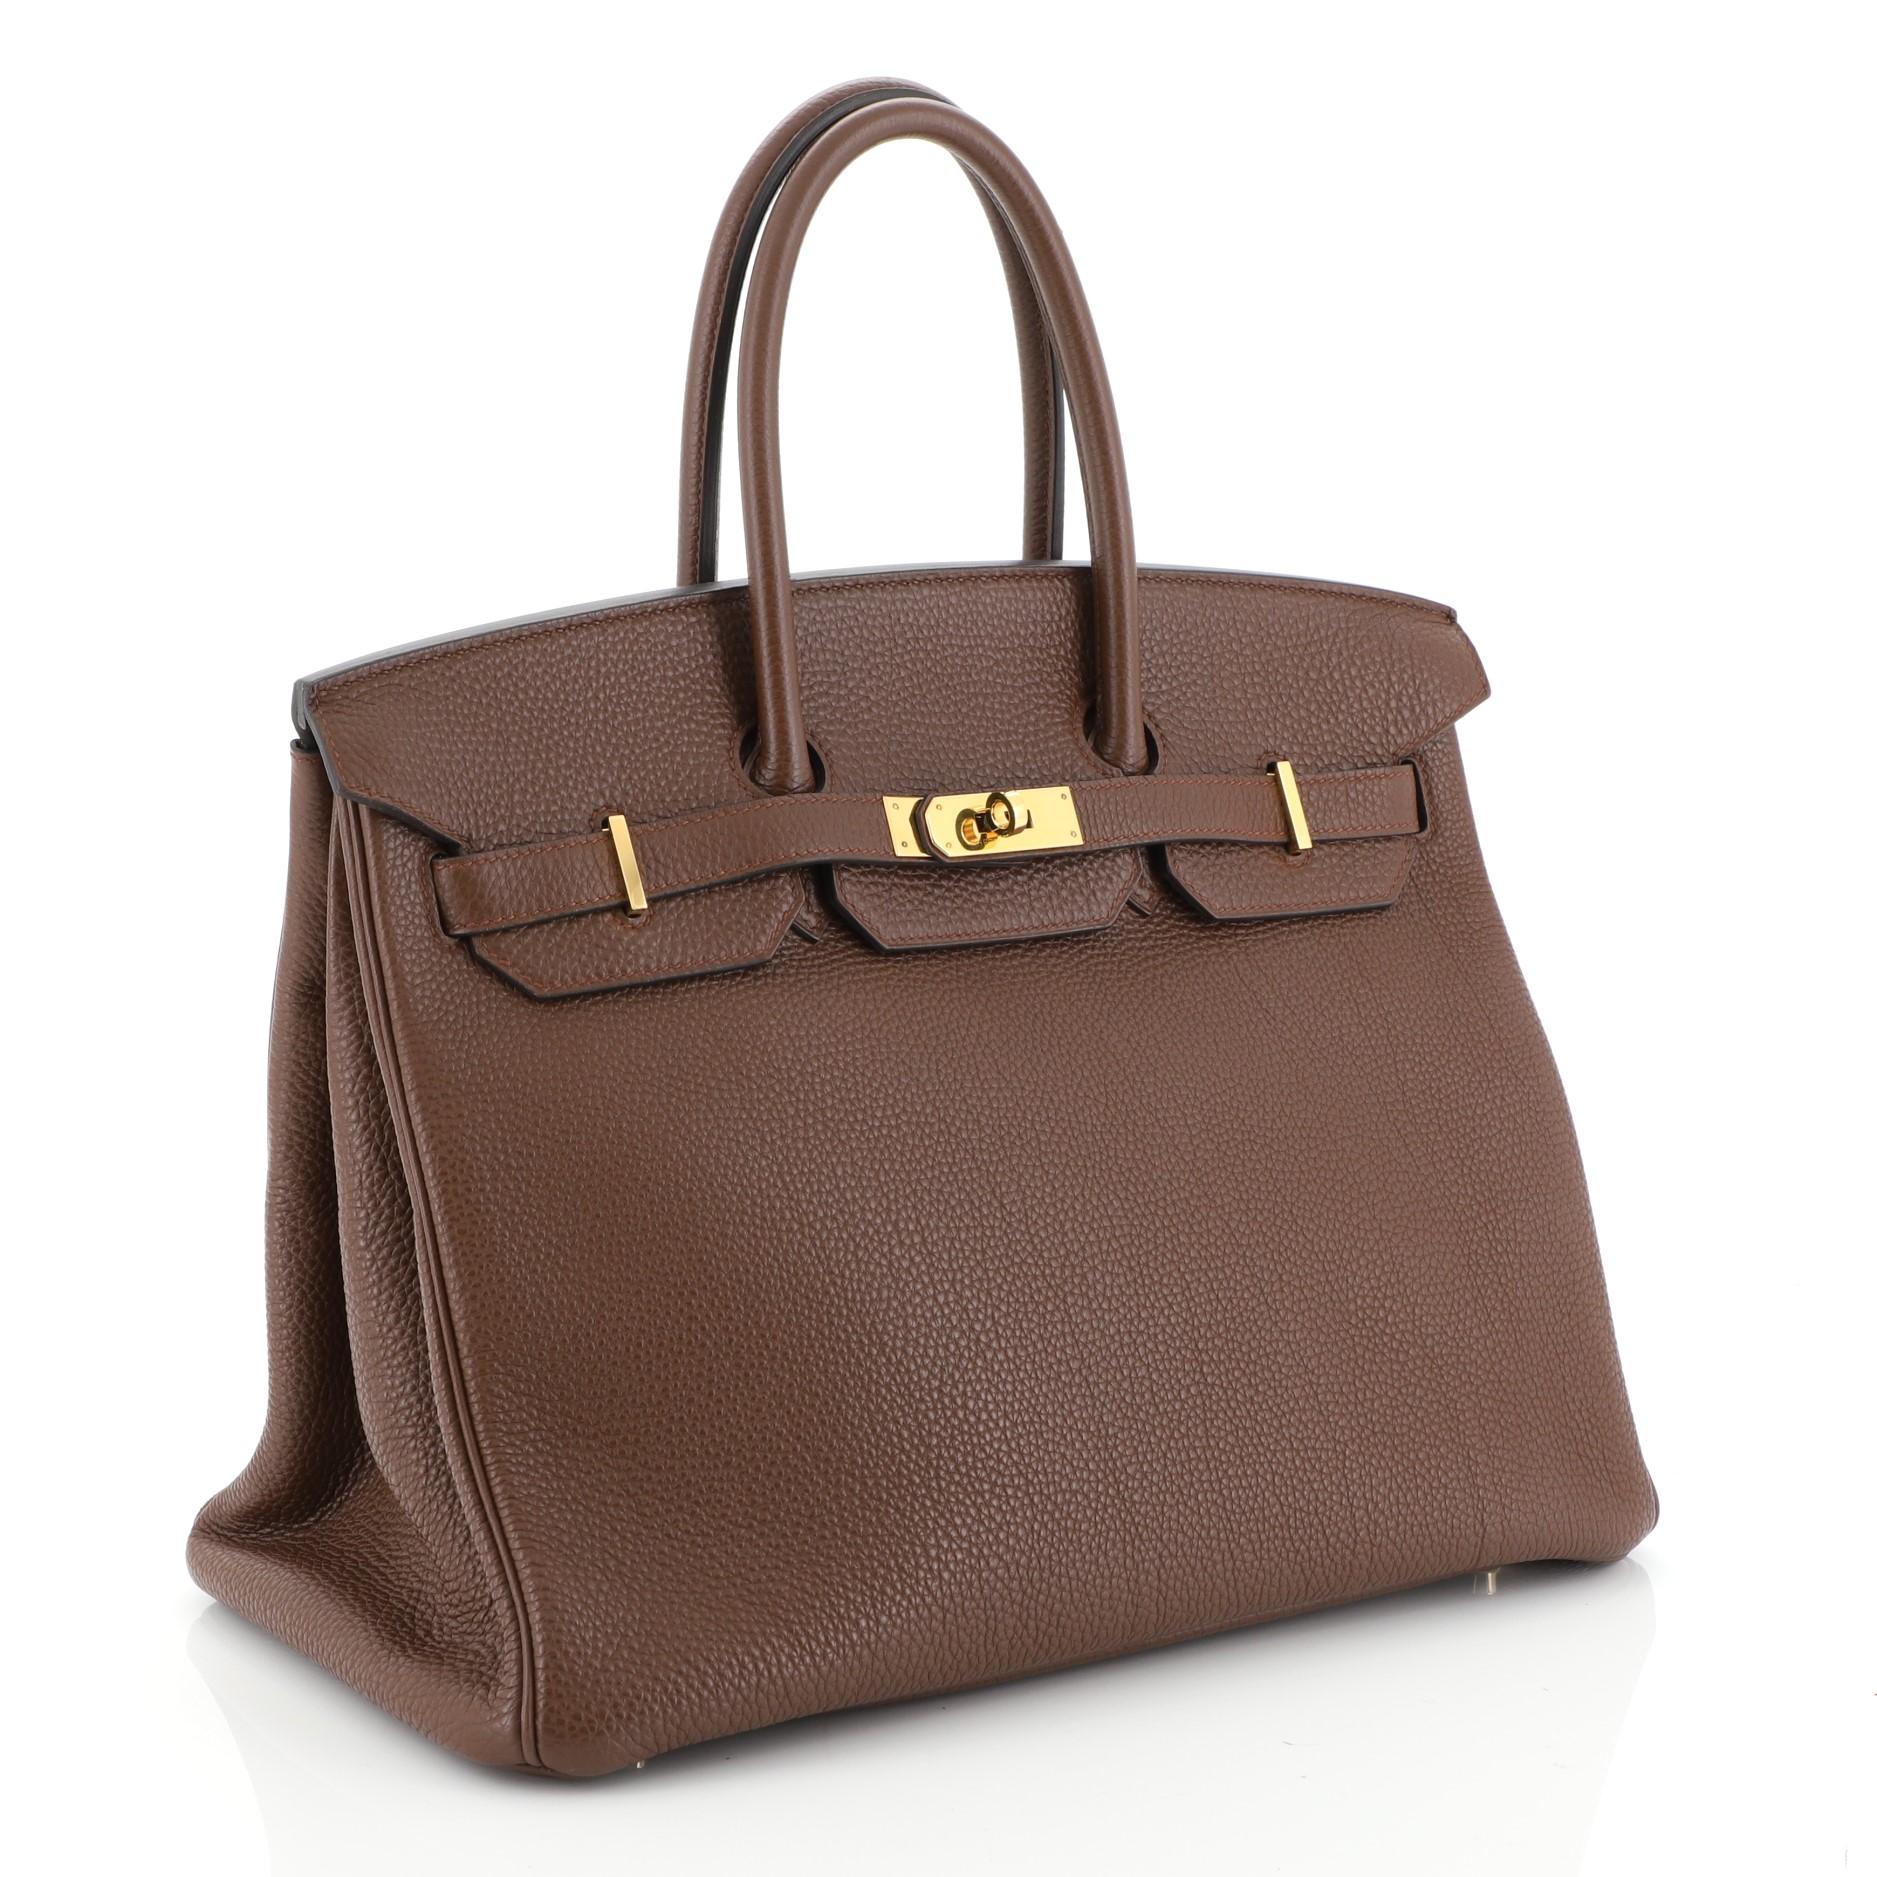 This Hermes Birkin Handbag Brulee Togo with Gold Hardware 35, crafted in Brulee brown Togo leather, features dual rolled top handles, frontal flap, and gold hardware. Its turn-lock closure opens to a Brulee brown Chevre leather interior with zip and